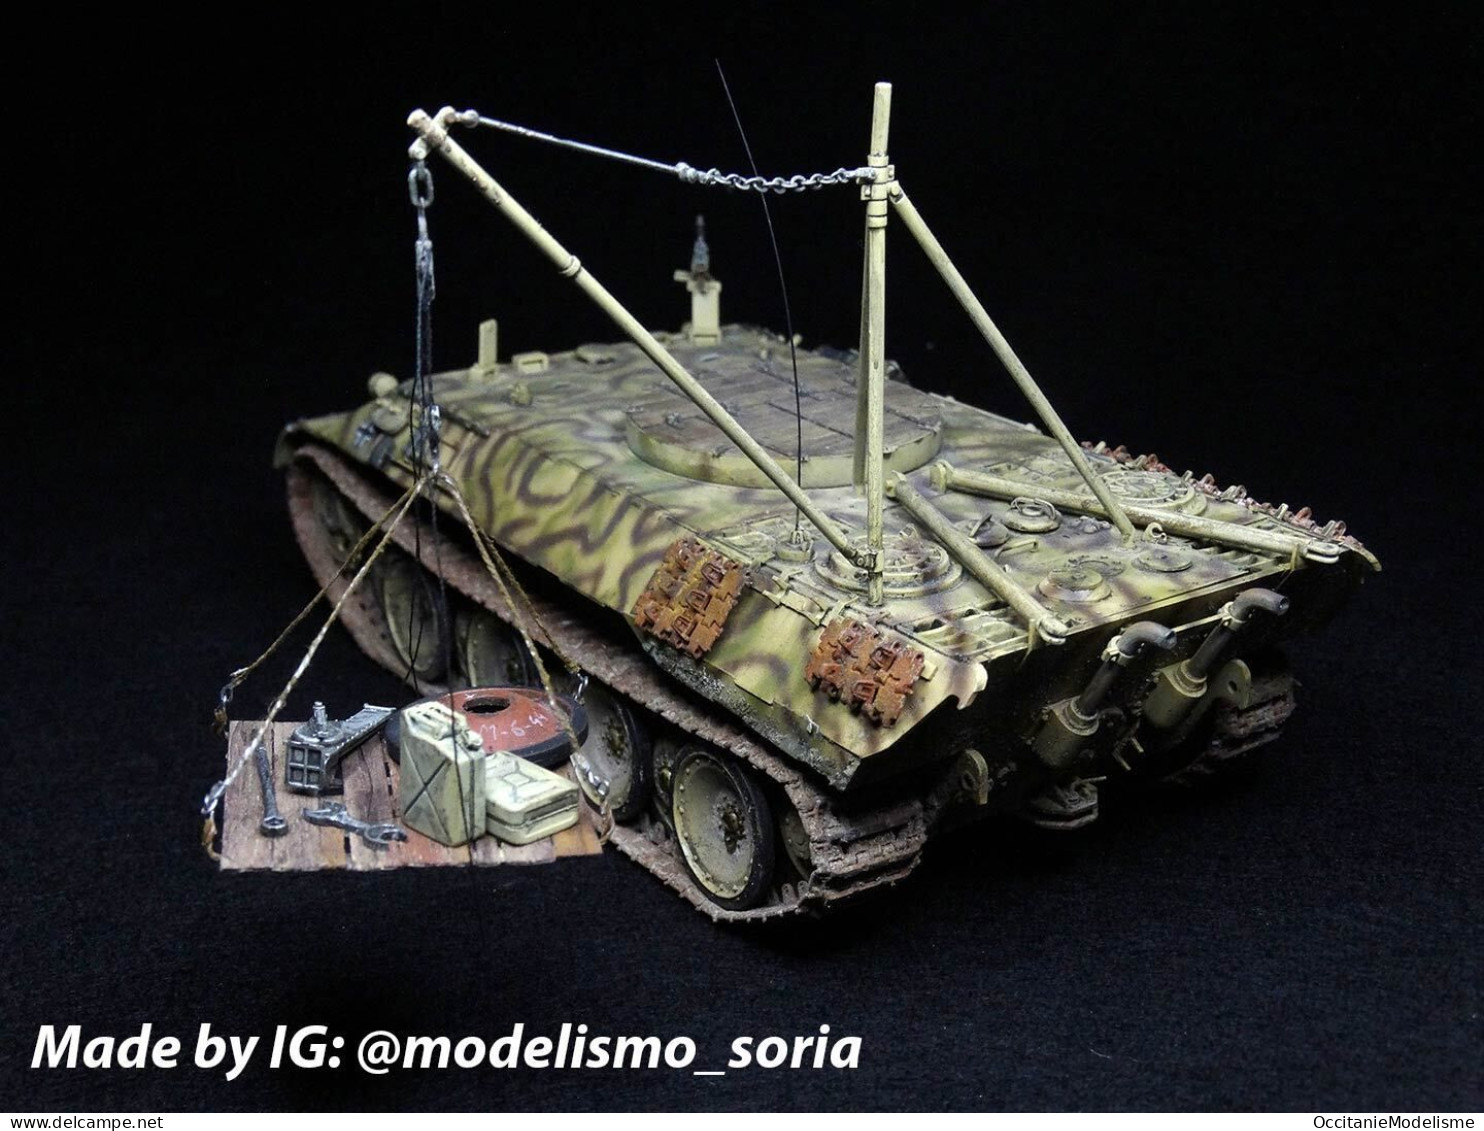 ICM - Char BERGEPANTHER Avec équipage Figurine WWII Maquette Kit Plastique Réf. 35342 Neuf NBO 1/35 - Military Vehicles